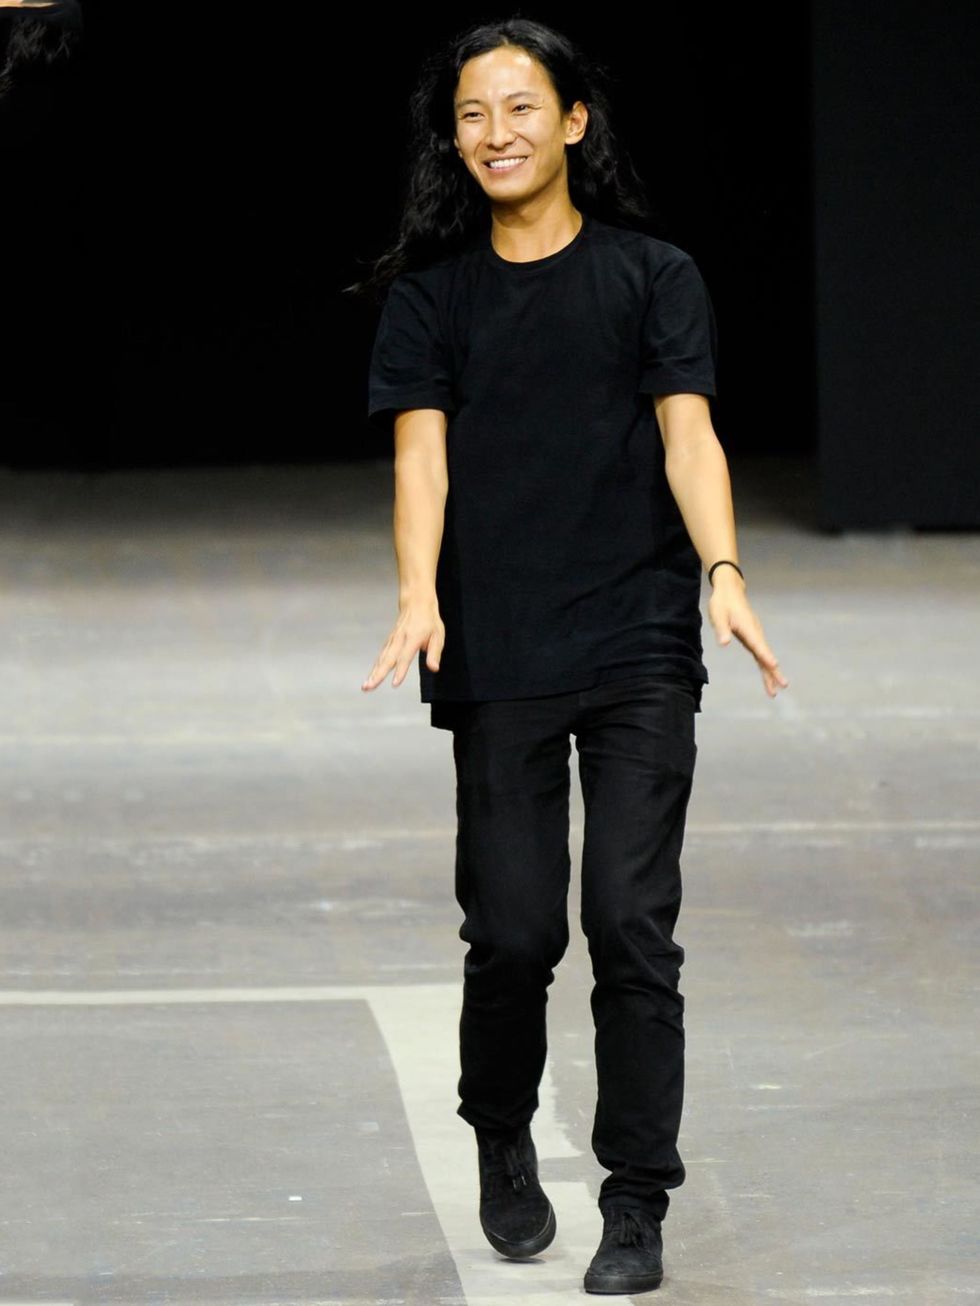 <p><strong>Alexander Wang - Show Of The Week?</strong>He was already a hot ticket on the NYFW schedule but, thanks to his <a href="http://www.elleuk.com/fashion/news/alexander-wang-is-going-to-balenciaga">new job at Balenciaga</a>, <a href="http://www.ell